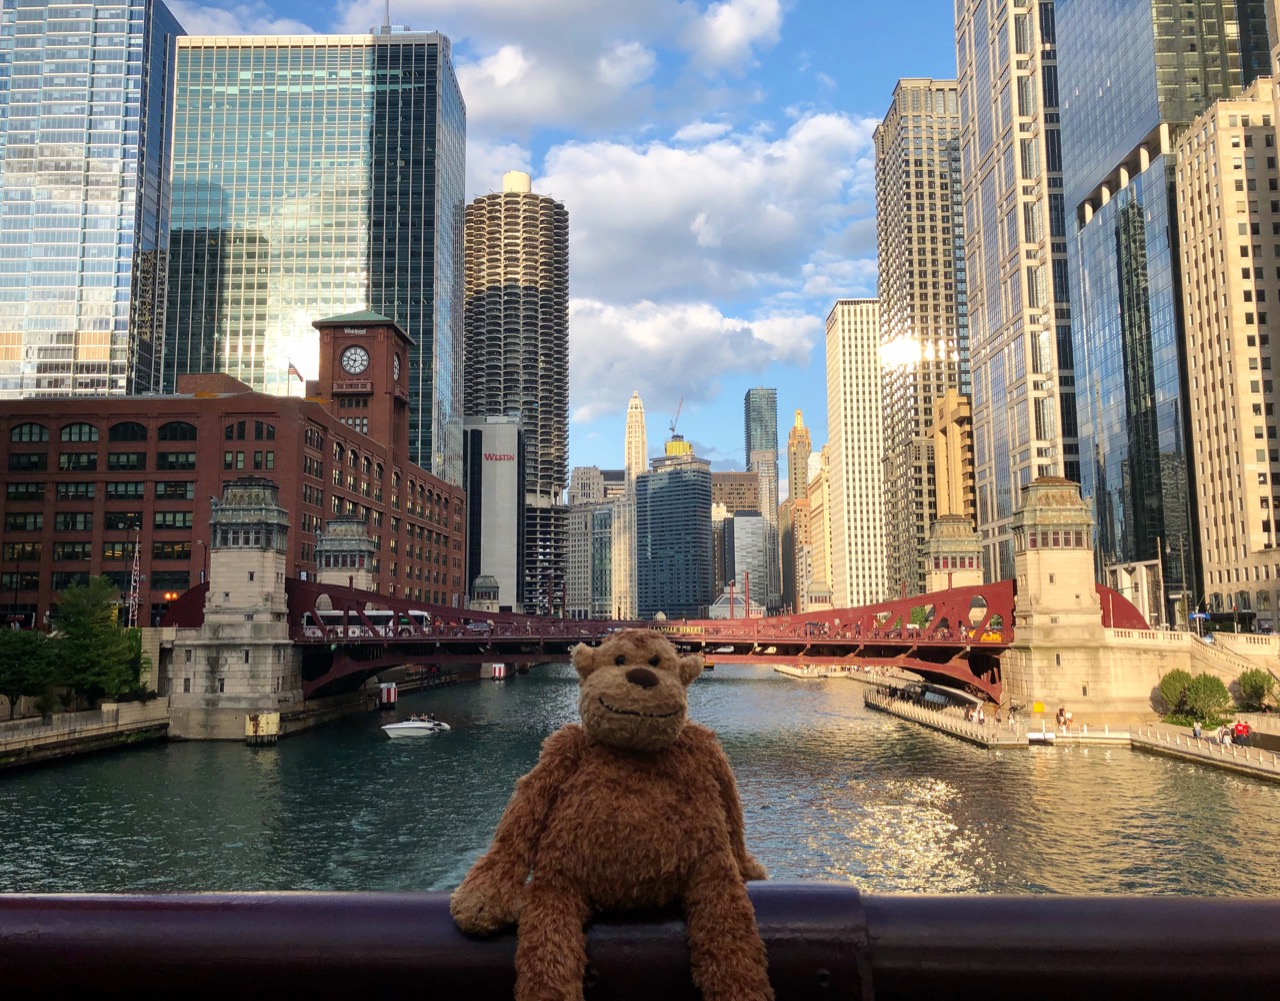 a stuffed animal on a railing overlooking a river